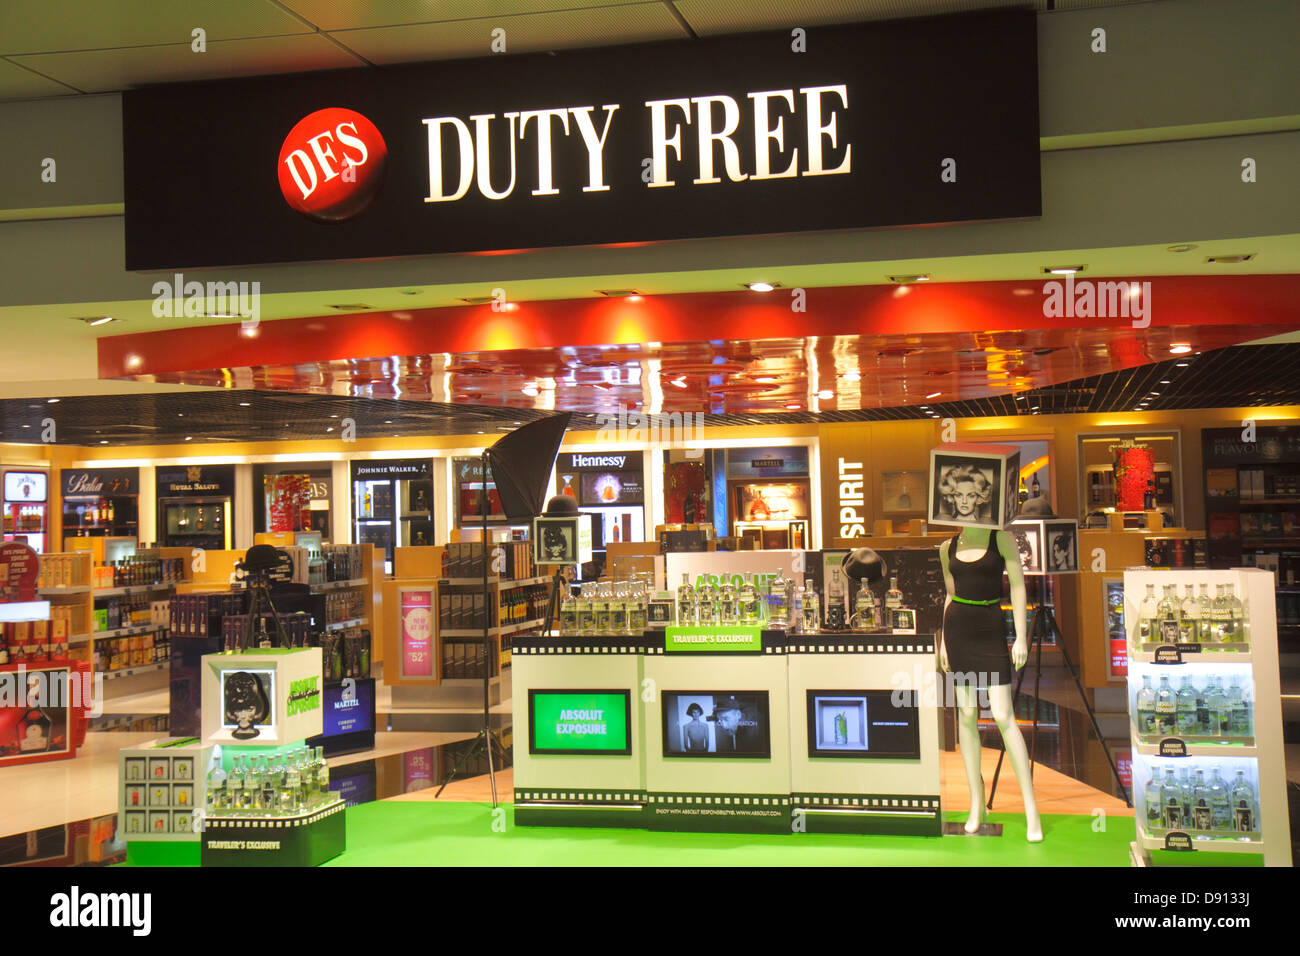 Duty Free Shopping Area Singapore Changi Airport Terminal 3 Stock Photo,  Picture and Royalty Free Image. Image 35403789.